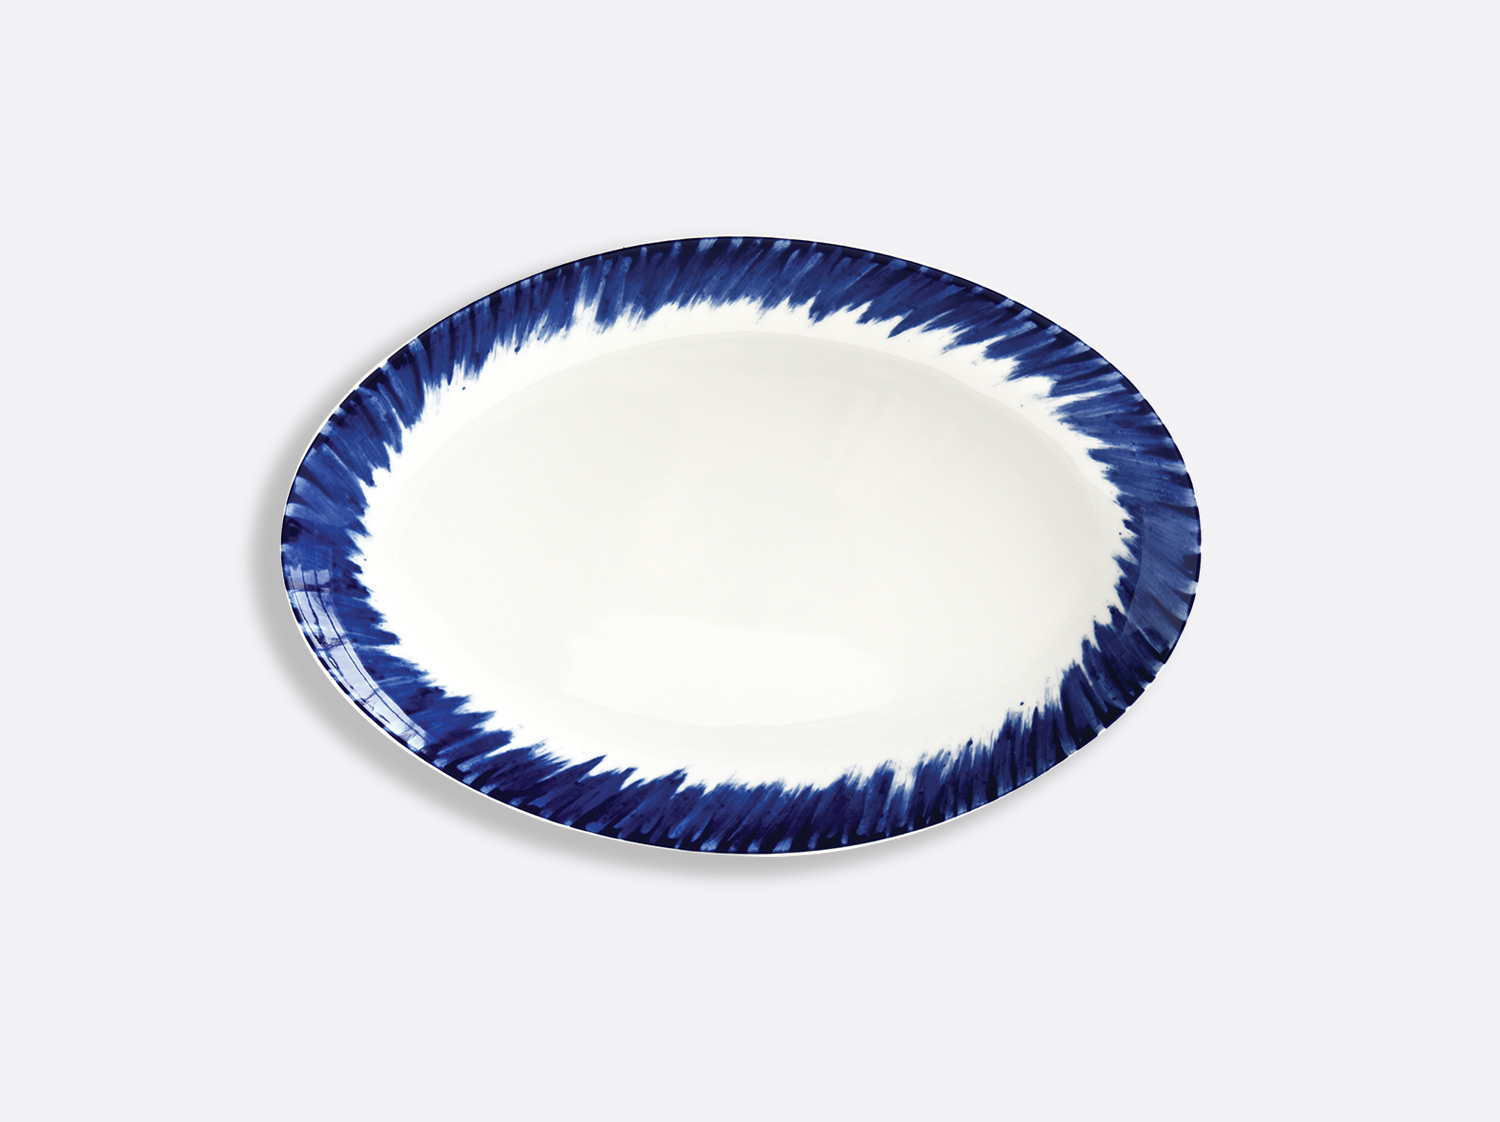 China Oval platter 33 cm of the collection IN BLOOM - Zemer Peled | Bernardaud